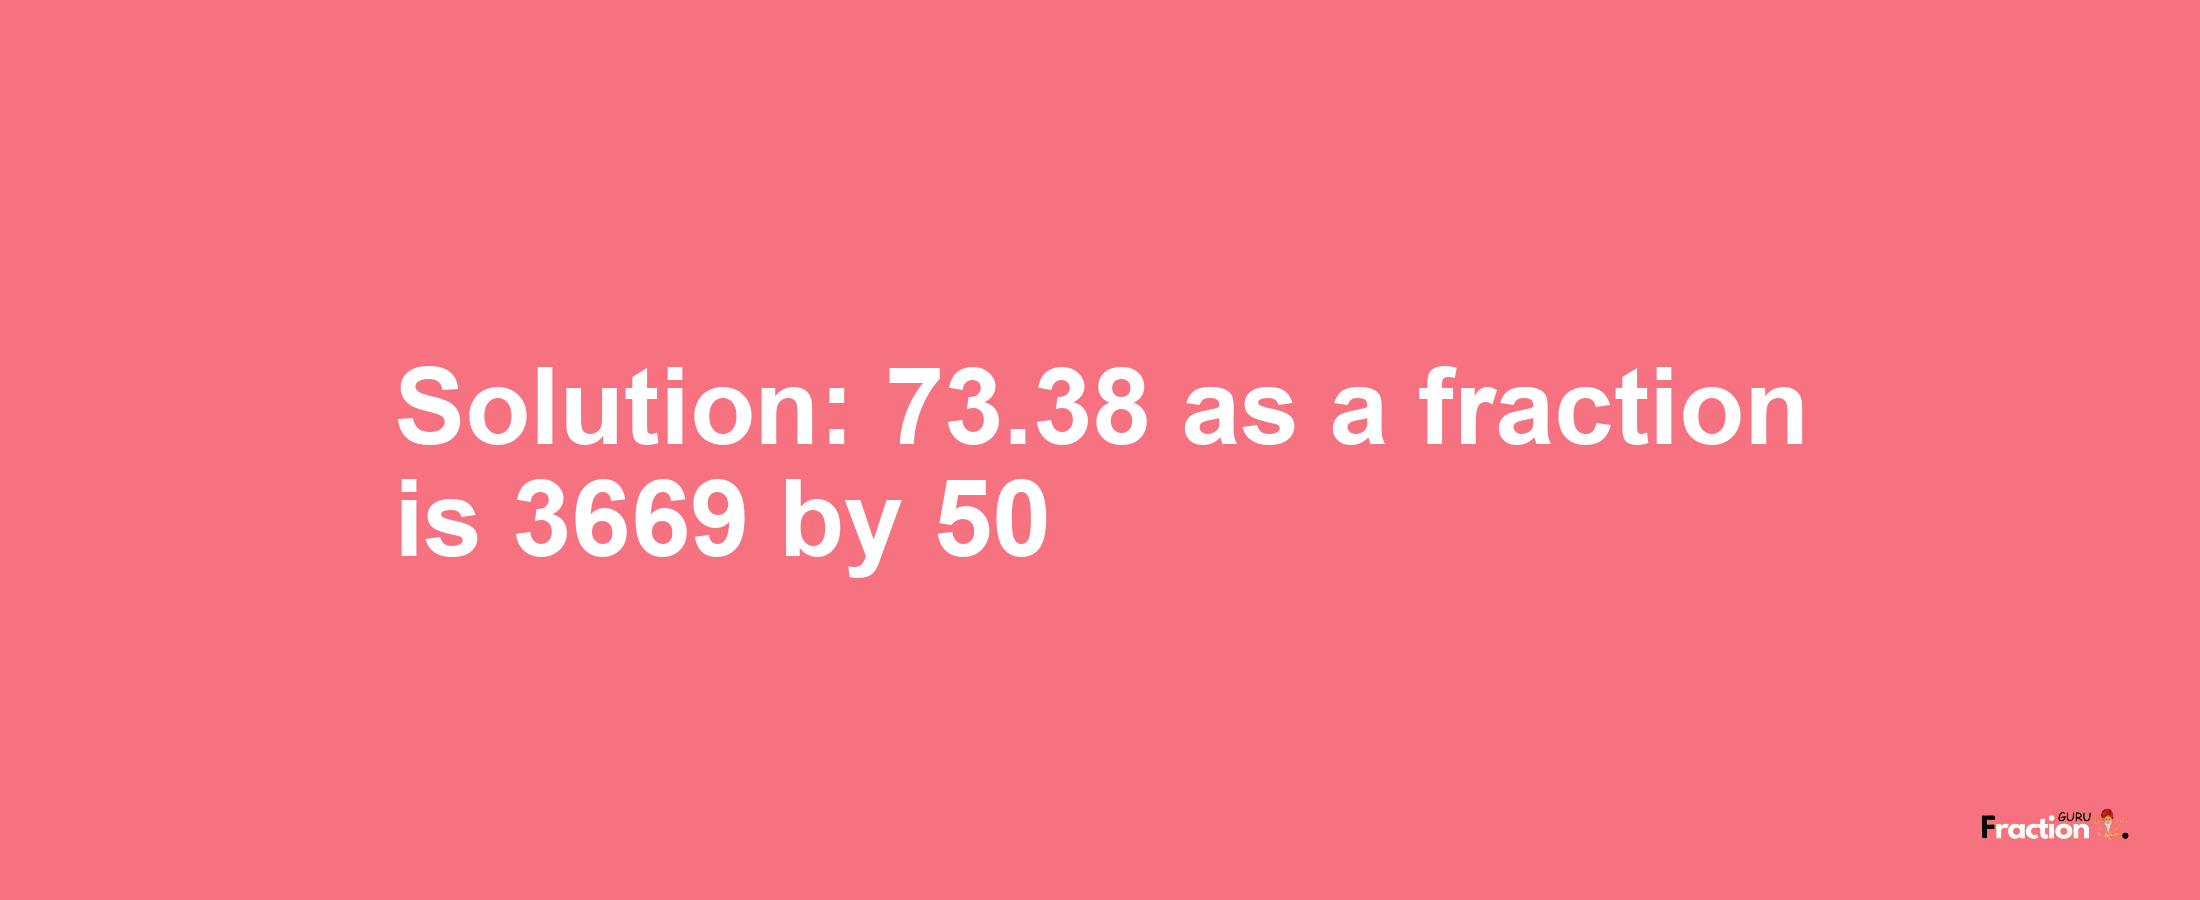 Solution:73.38 as a fraction is 3669/50